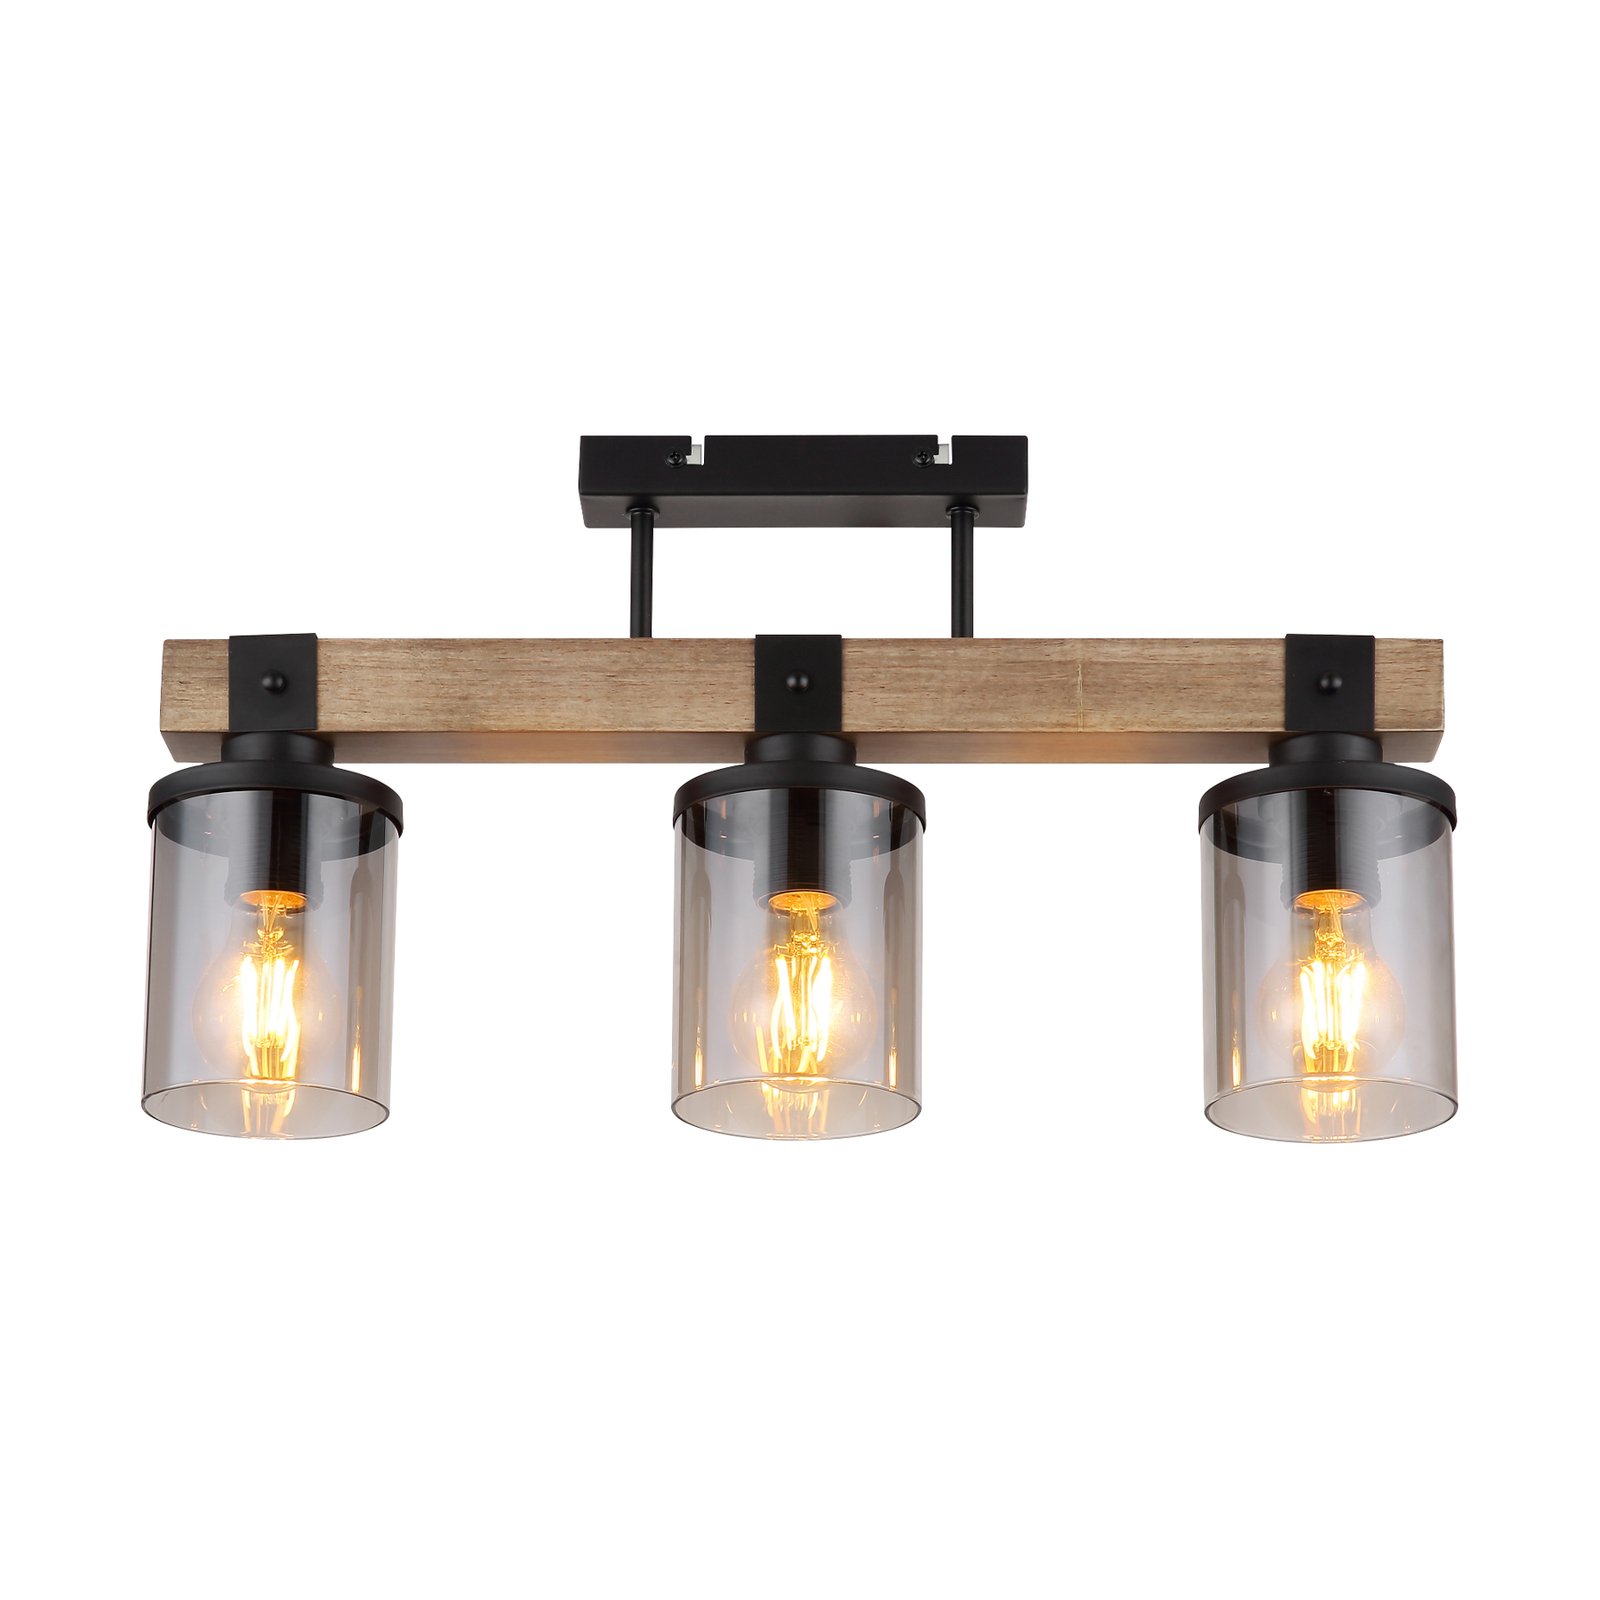 Lila ceiling light with a wooden beam, 3-bulb